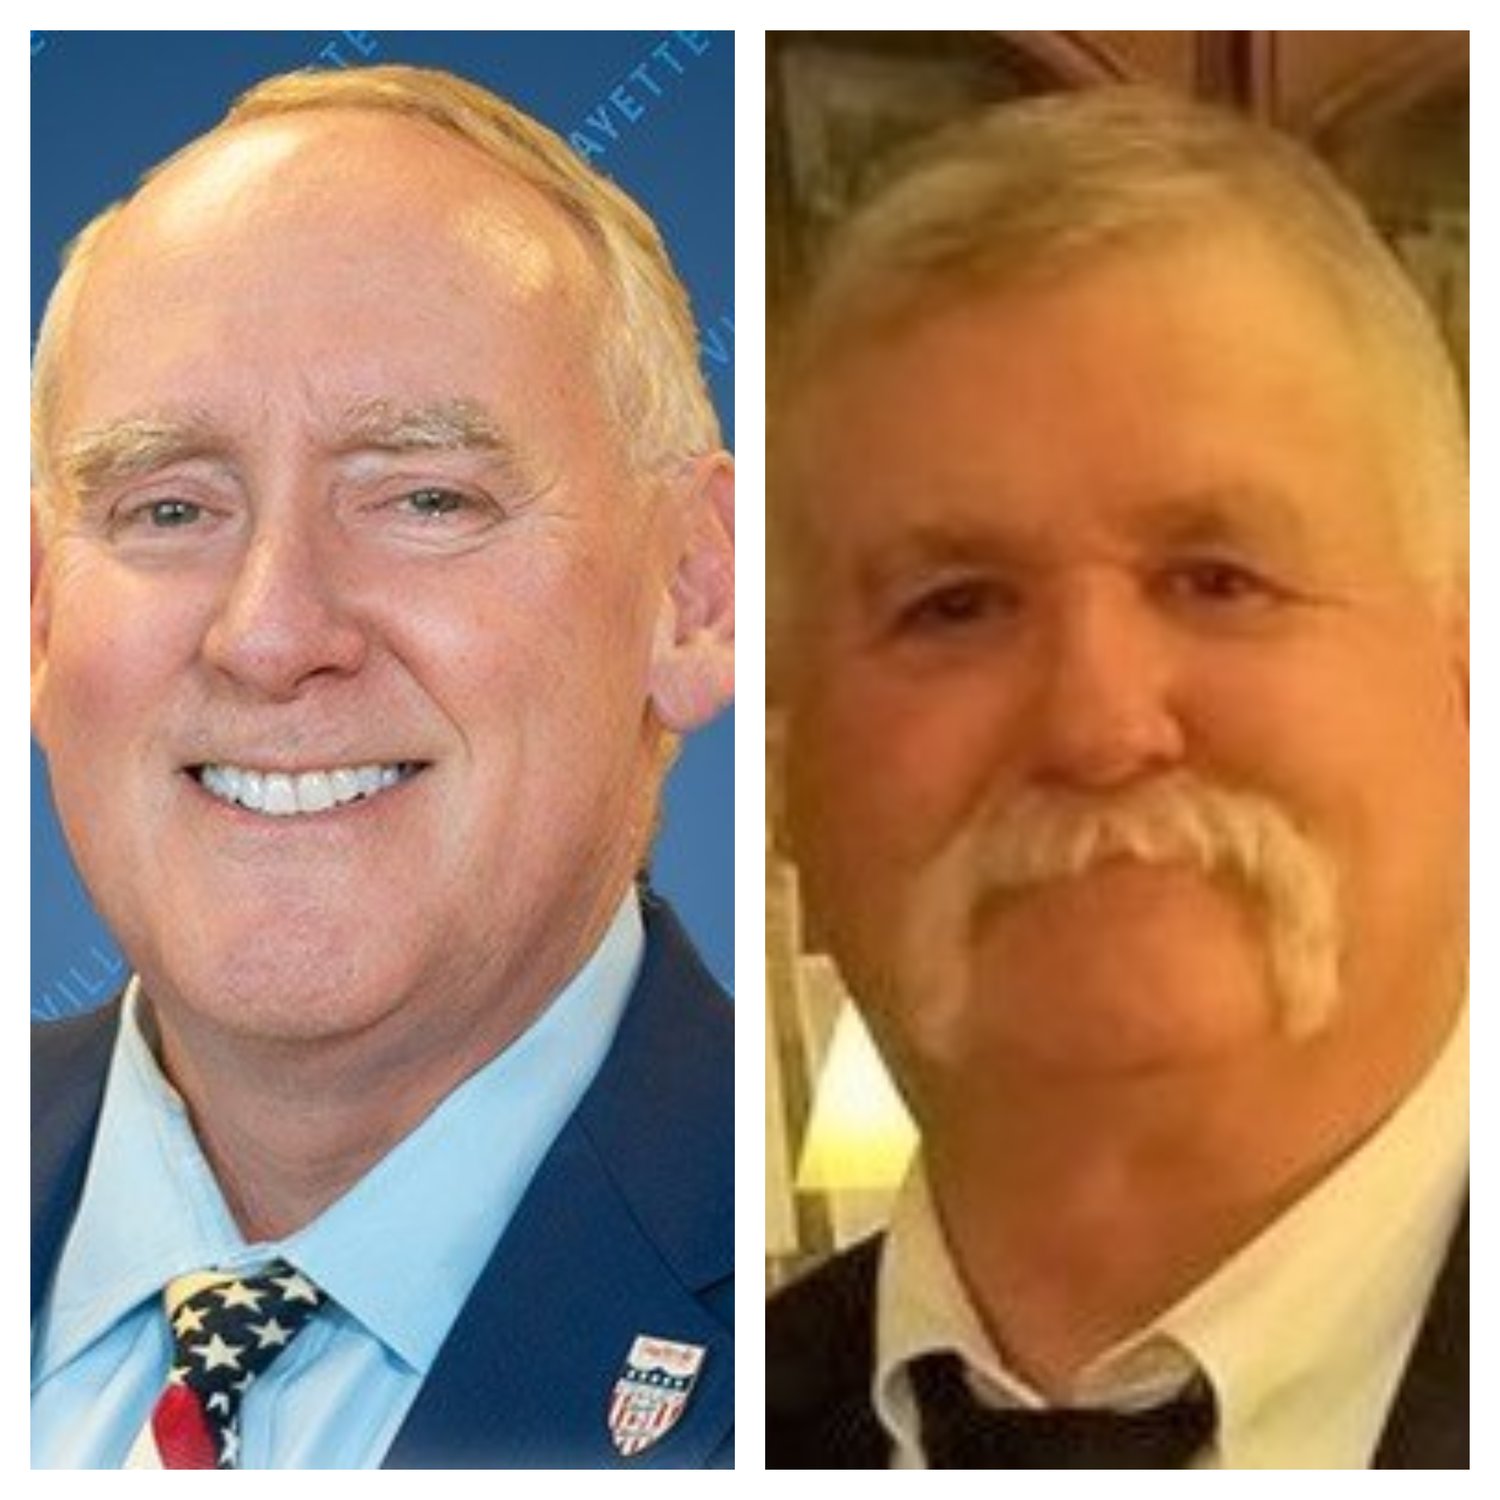 Johnny Dawkins, left, defeated Fred LaChance for the Fayetteville City Council seat representing District 5, according to unofficial returns.